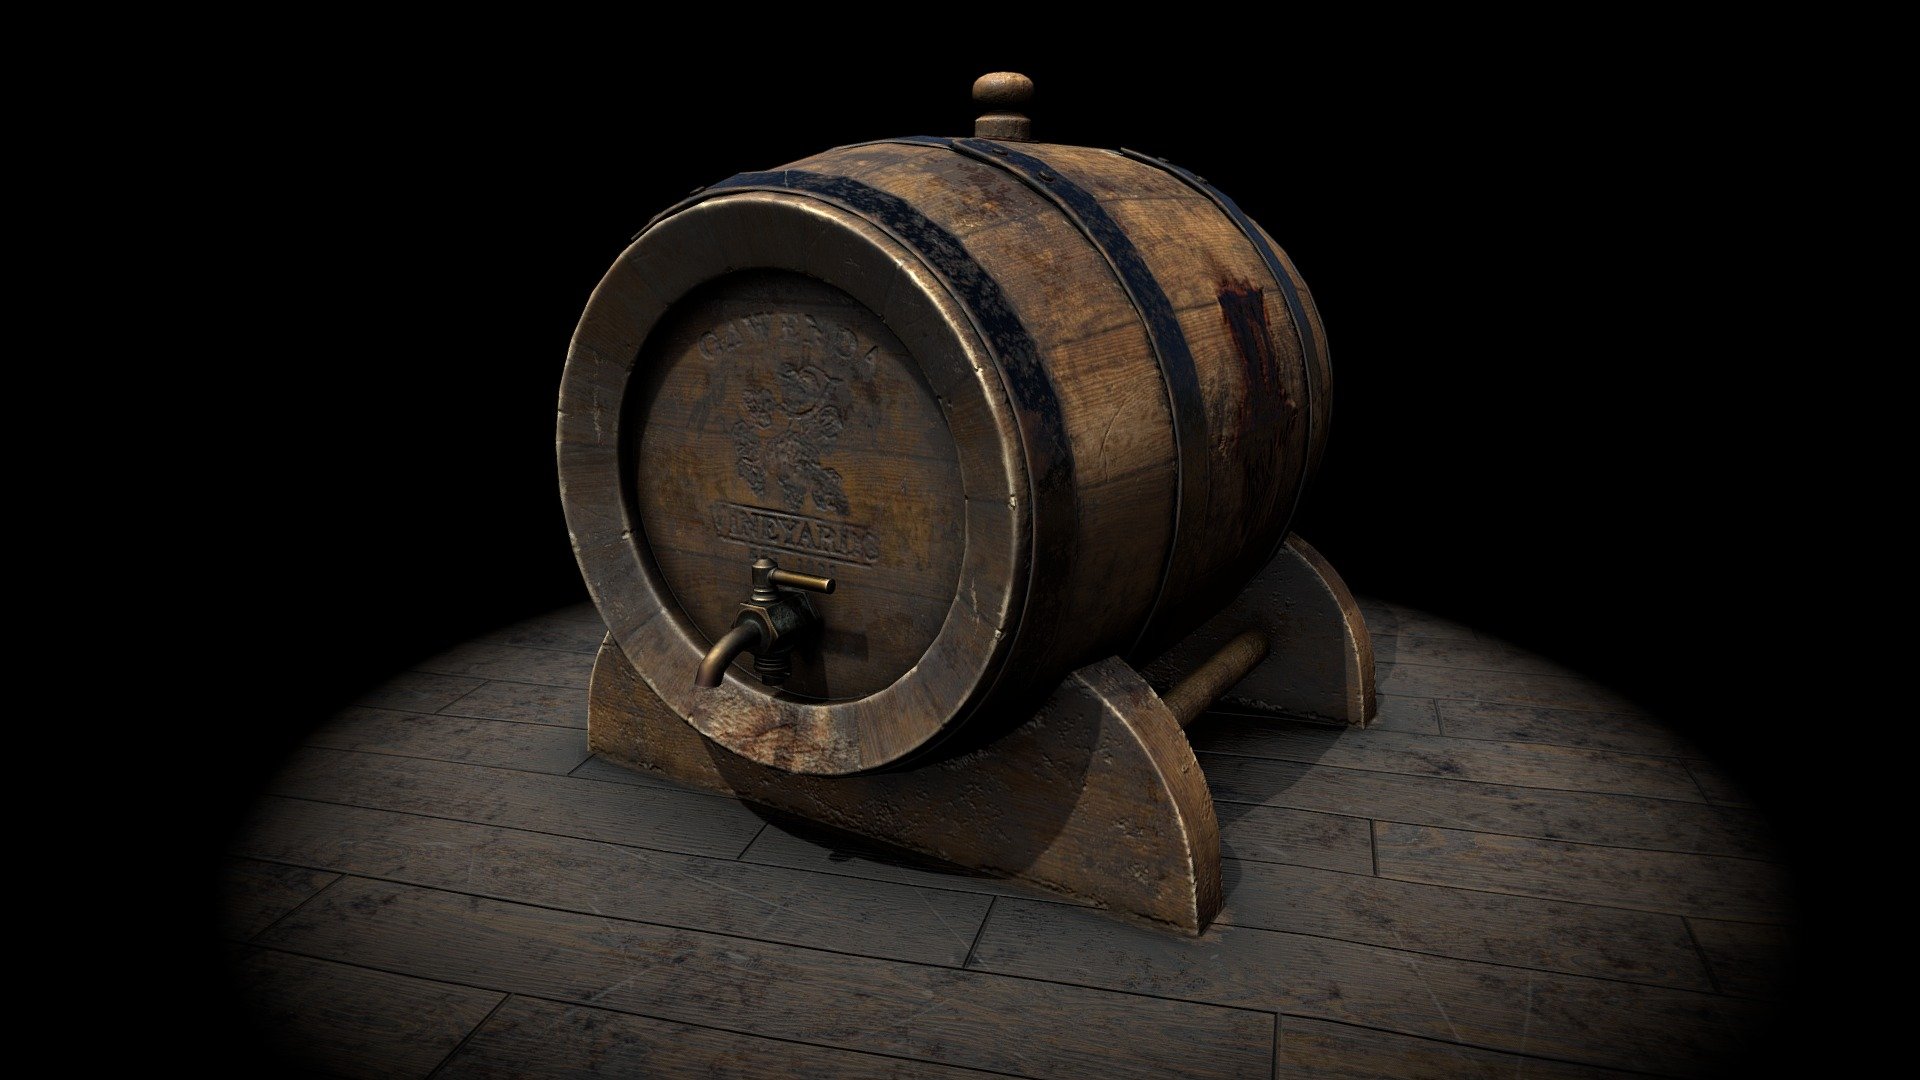 Old wine barrel created in Blender and textured in Substance Painter - Old Wine Barrel - 3D model by Rafał (@rafal.gawenda) 3d model